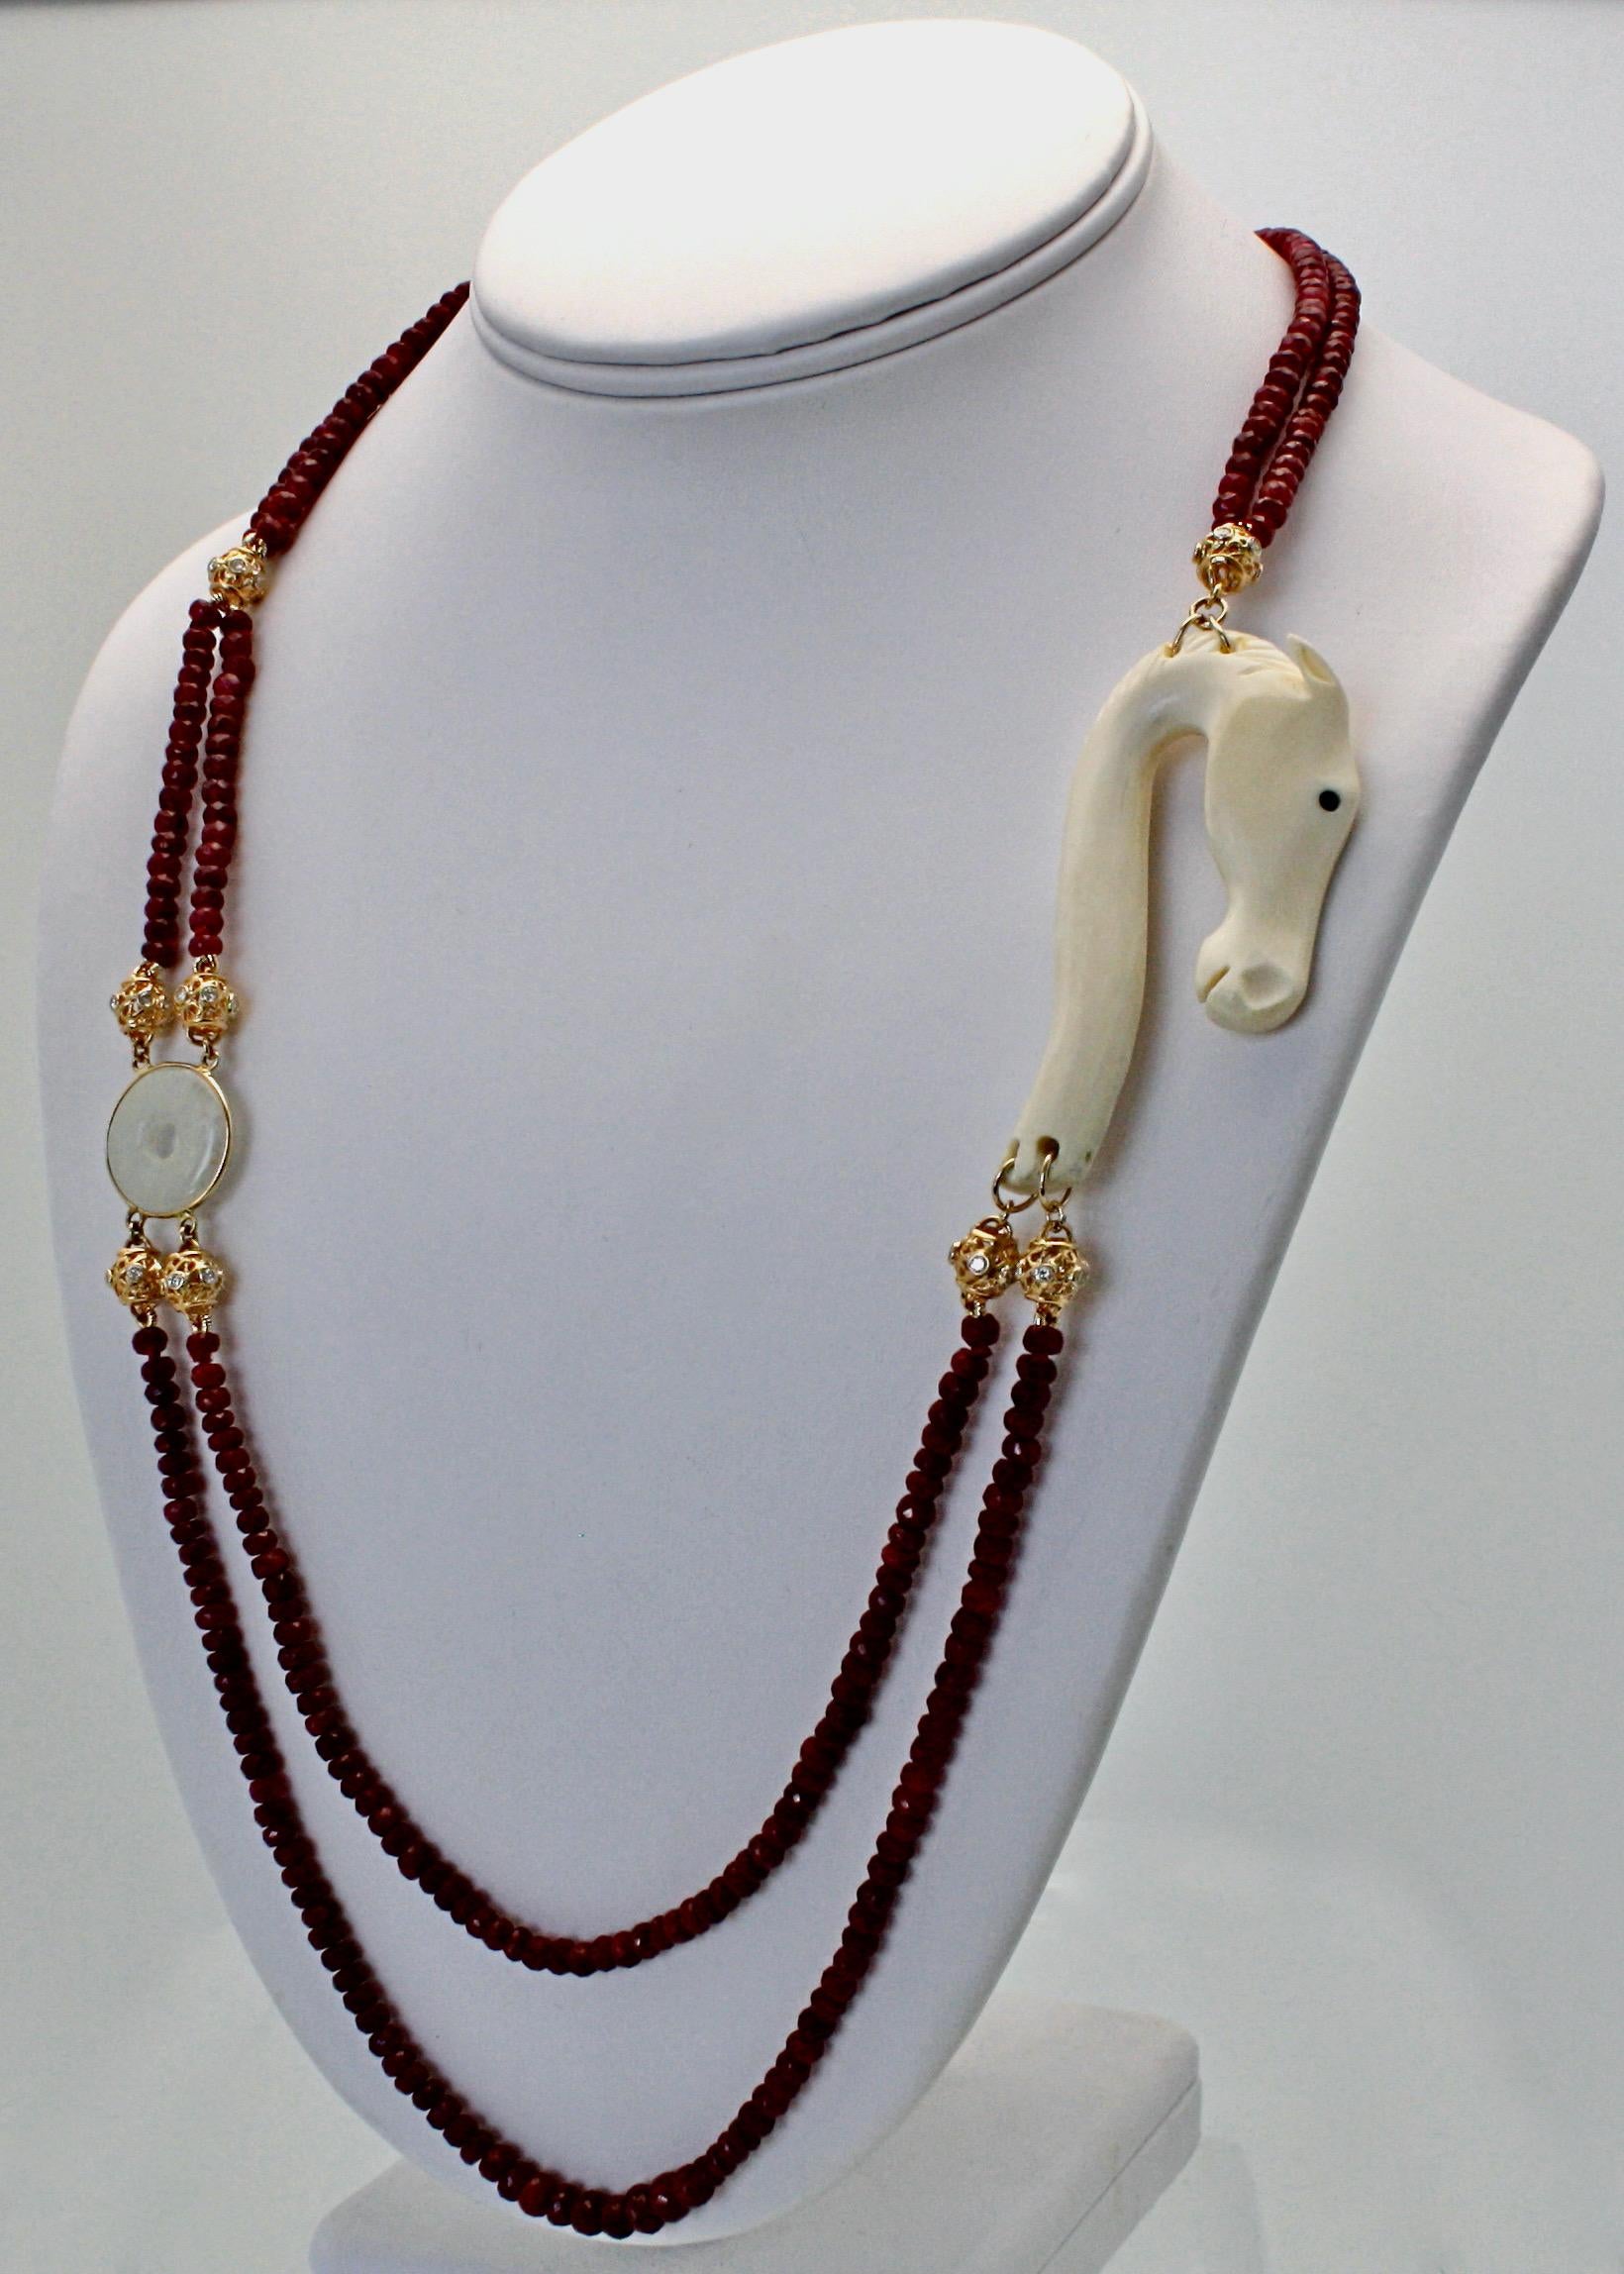 This gorgeous bead necklace is custom made and one of a kind.  It features faceted Ruby Beads The Ruby beads form a double strand necklace as there are  2 strands of Ruby Beads which graduate in the center and a single row in the back. This necklace